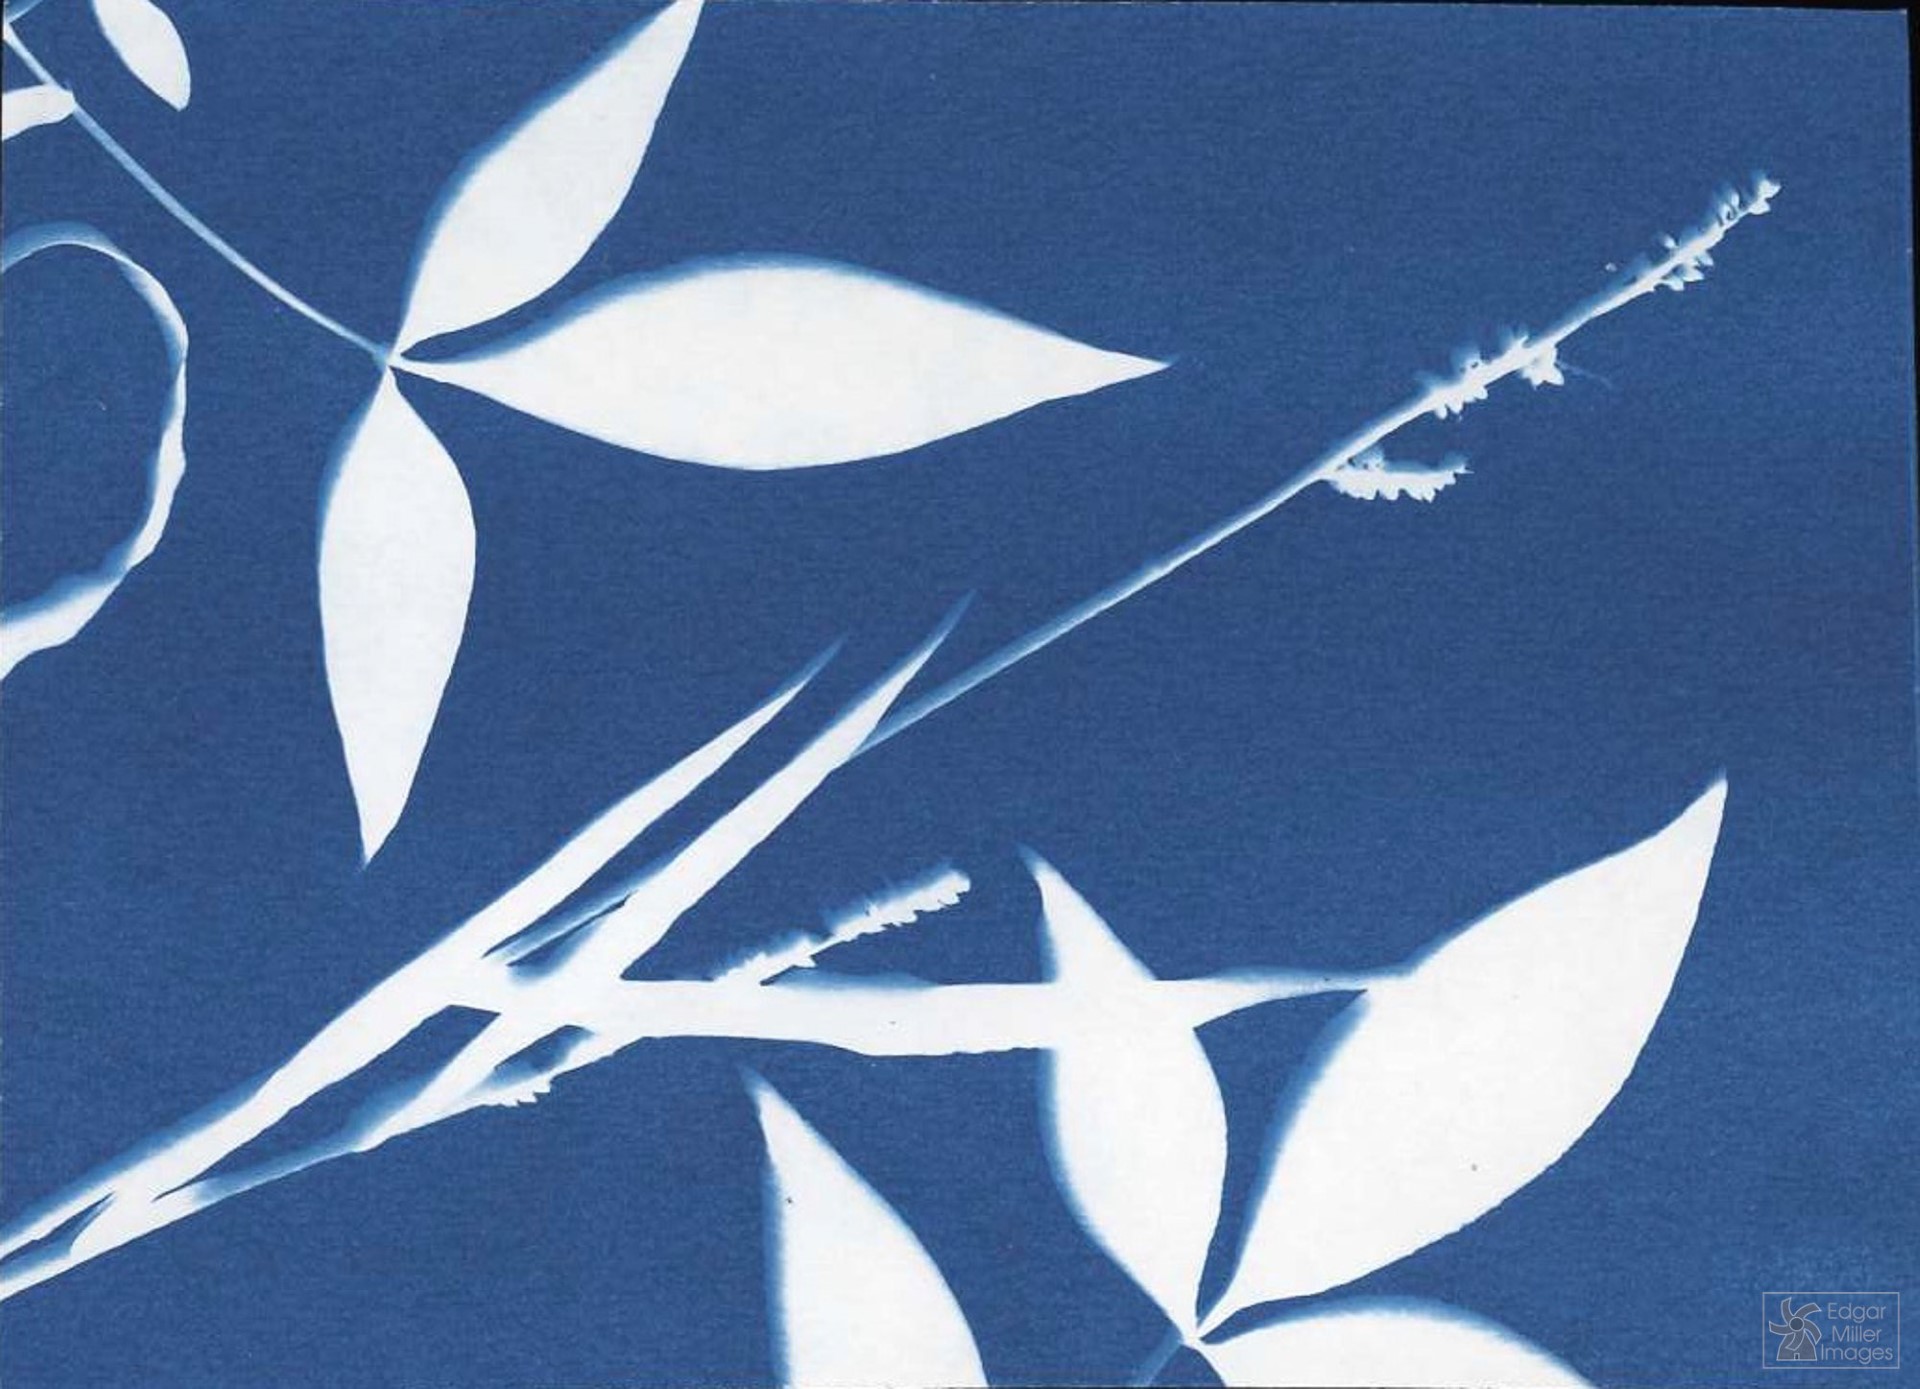 Cyanotype image in blue and white of leaves by photographer Edgar Miller